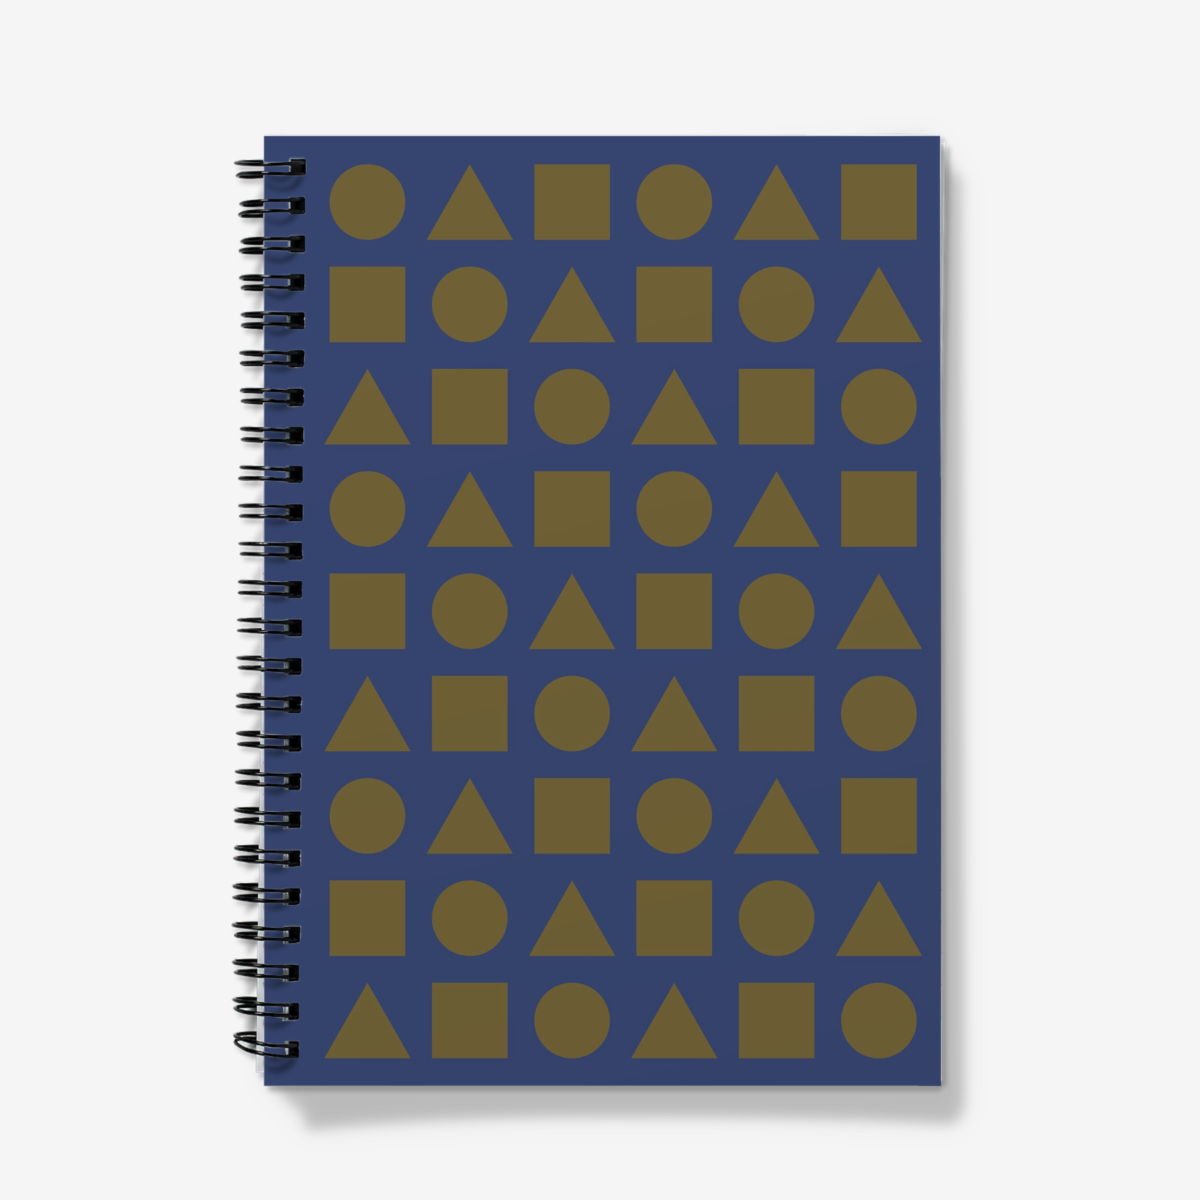 Olive Shapes on Nautilus Spiral Notebook